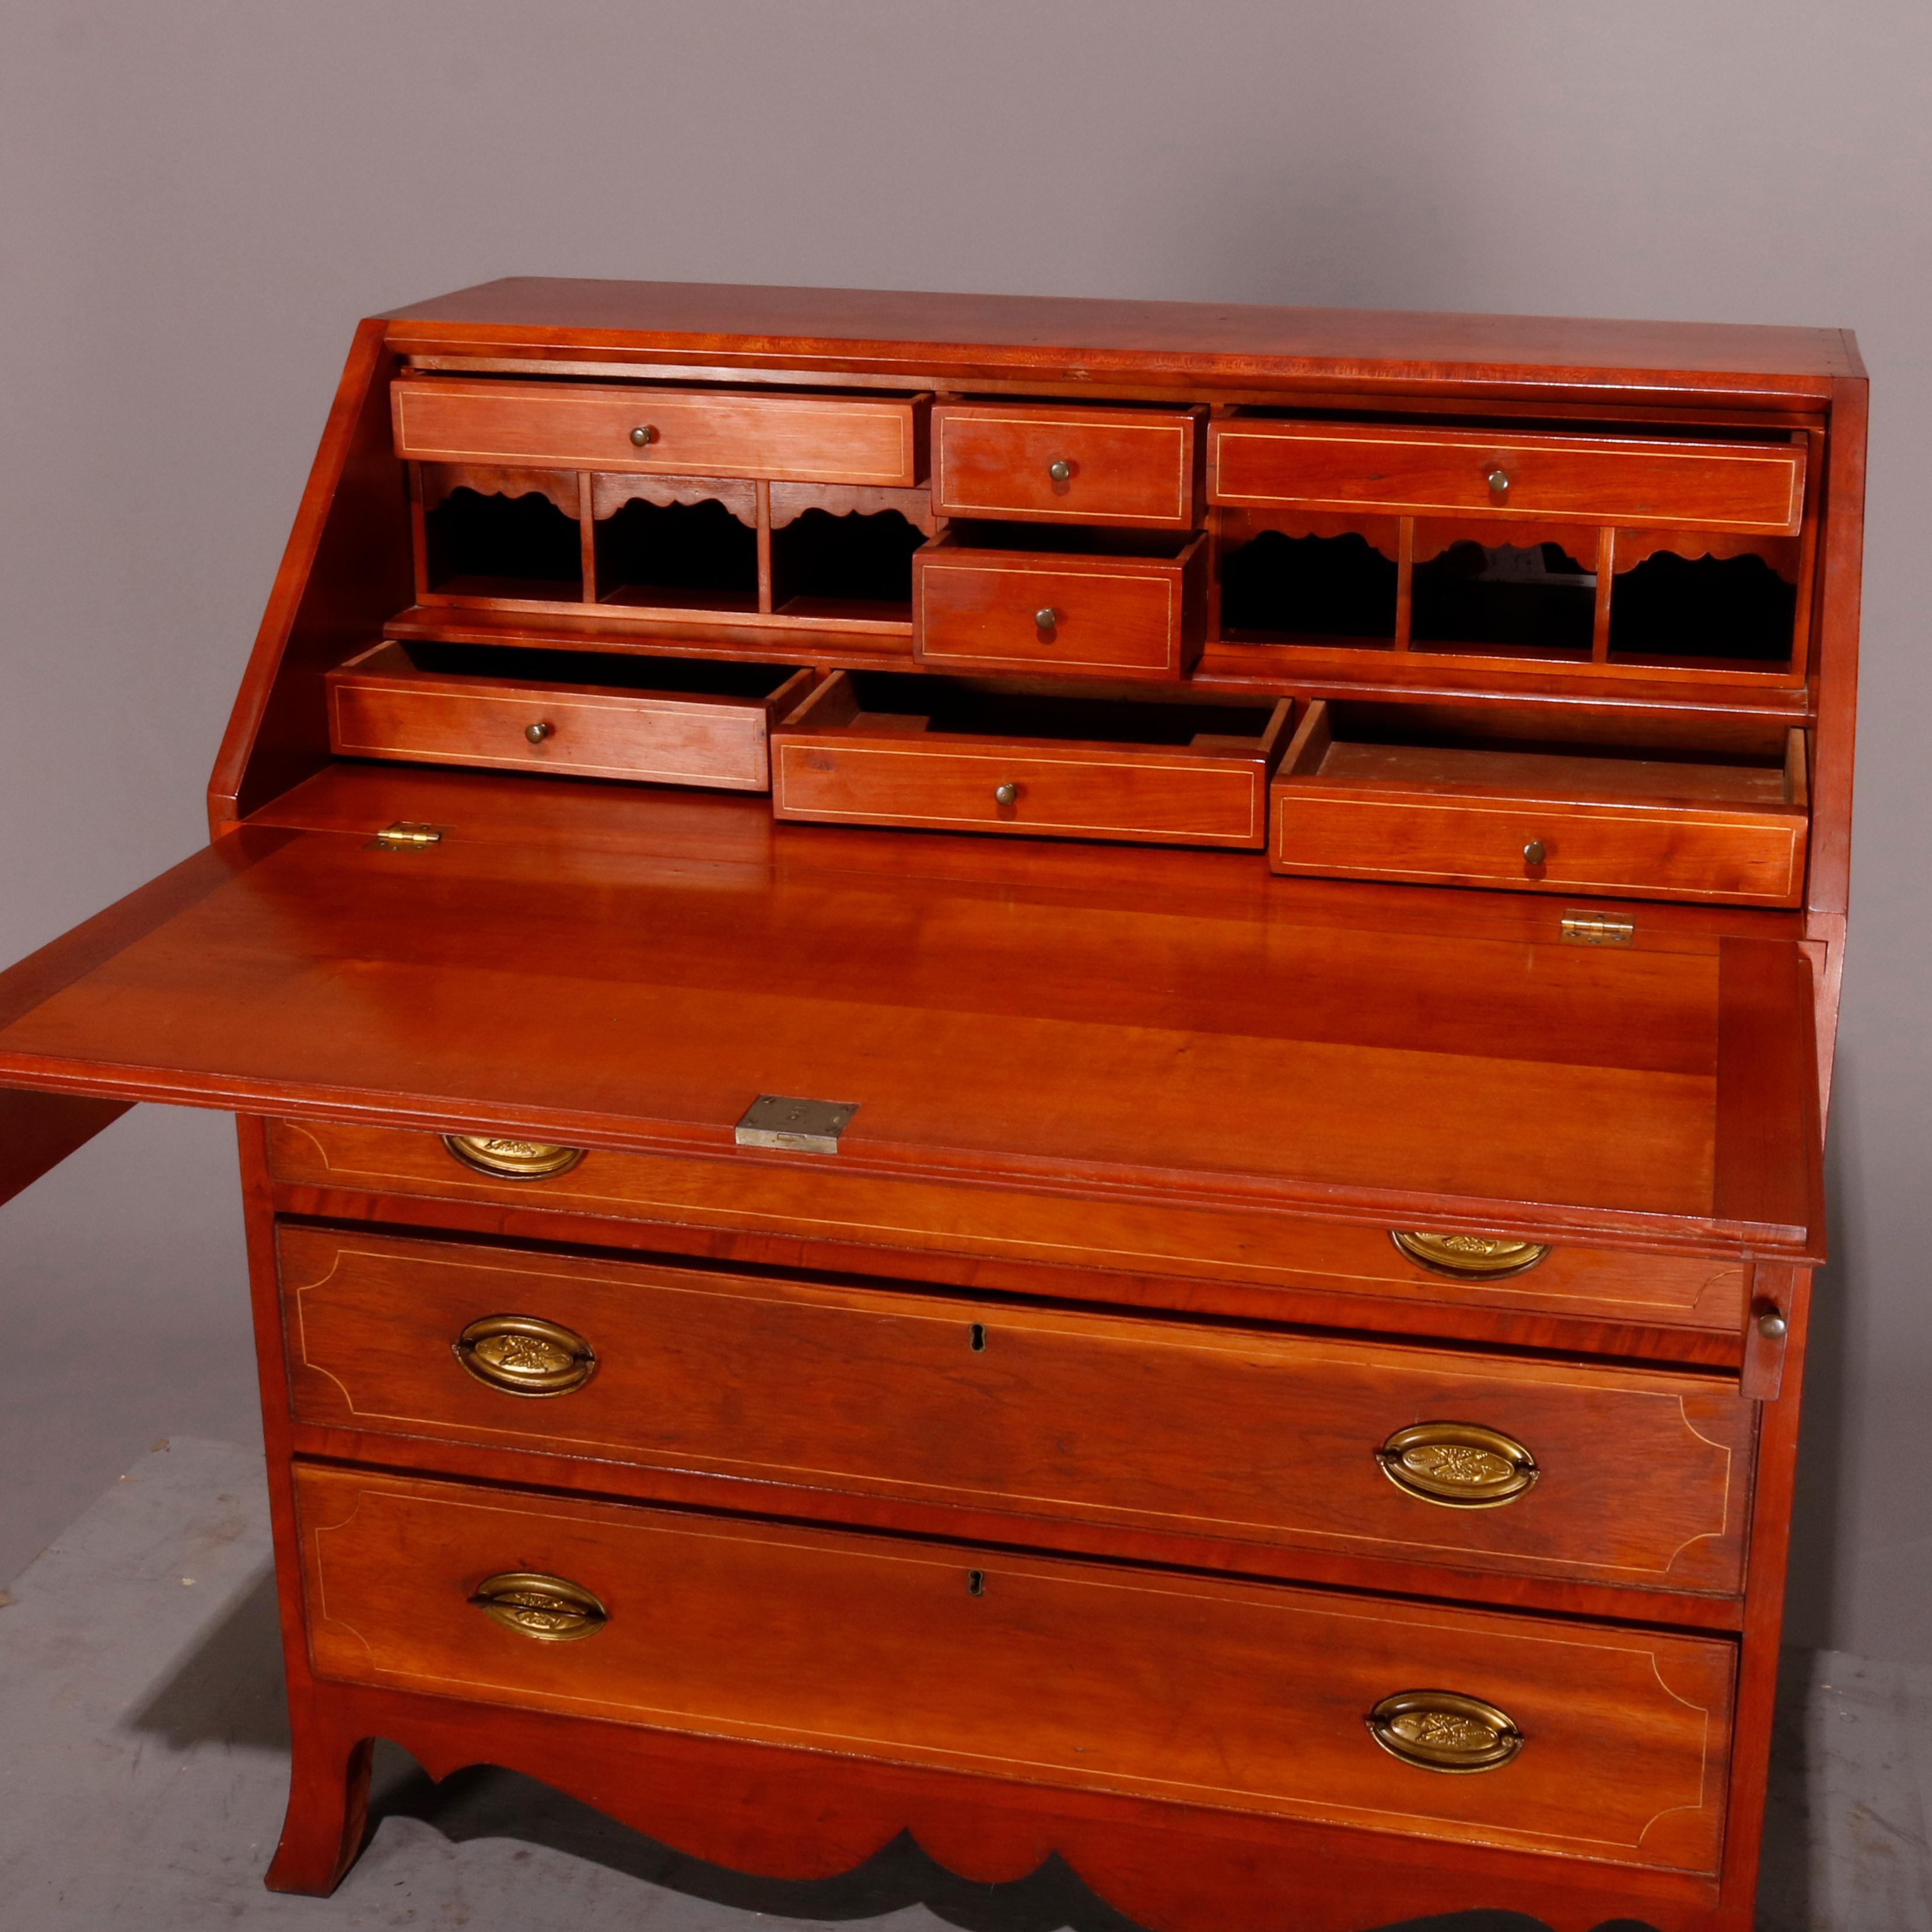 An antique Hepplewhite style slant front desk offers cherry construction with drop front opening to reveal writing surface surmounted by smaller drawers and pigeon holes and supported by pull-outs, case with four long drawers each having cast bronze